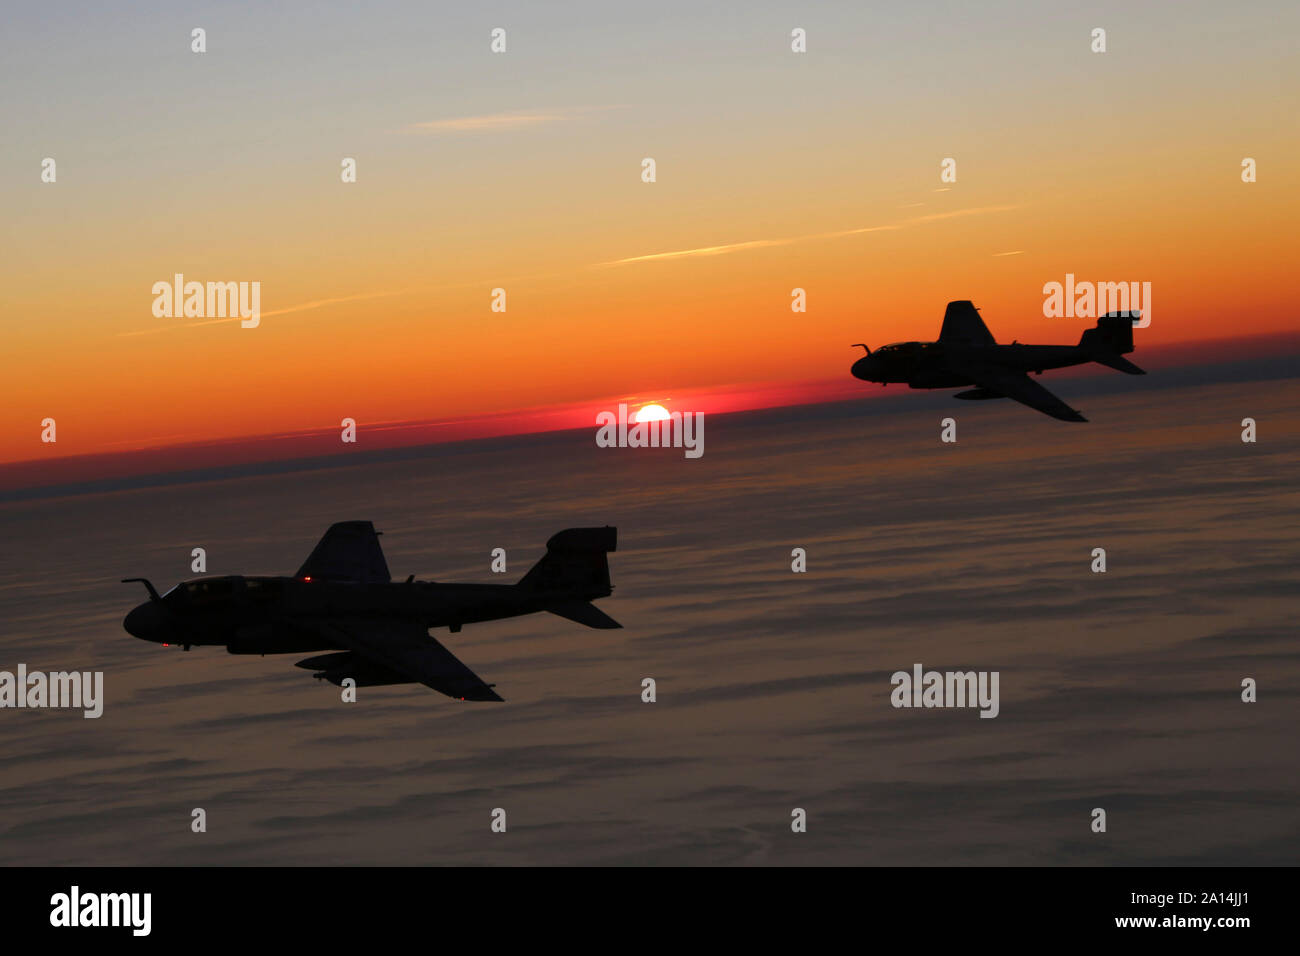 Two EA-6B Prowlers are silhouetted by a setting sun. Stock Photo